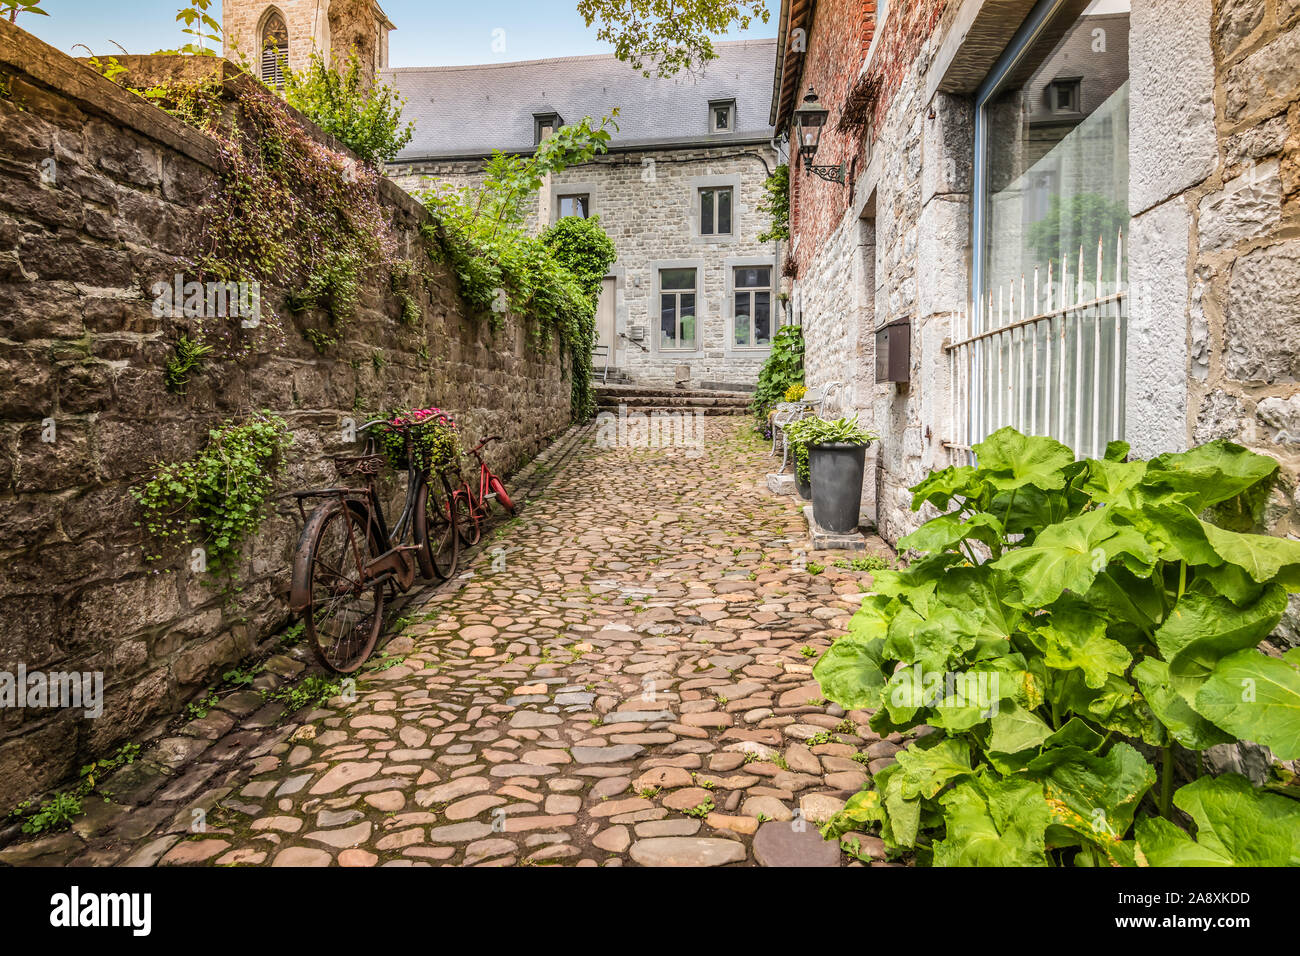 Cobblestone alley in the old city center of Durbuy, Wallonia, Belgian Ardennes. Stock Photo